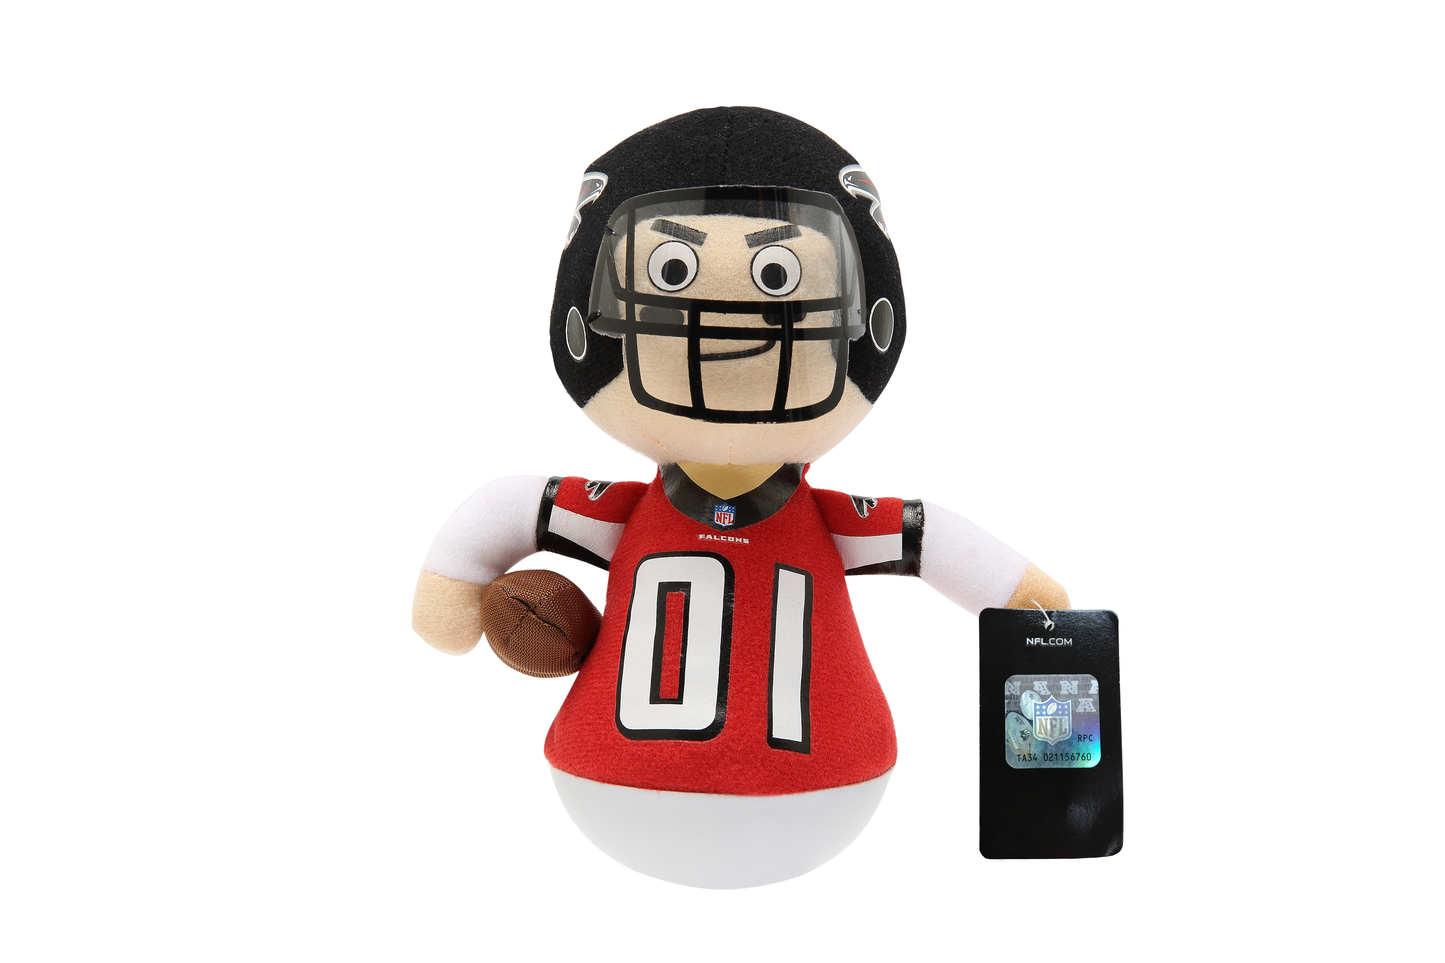 NFL Rock'emz Collectible Sports Figurine - 7 in. tall (Atlanta Falcons)